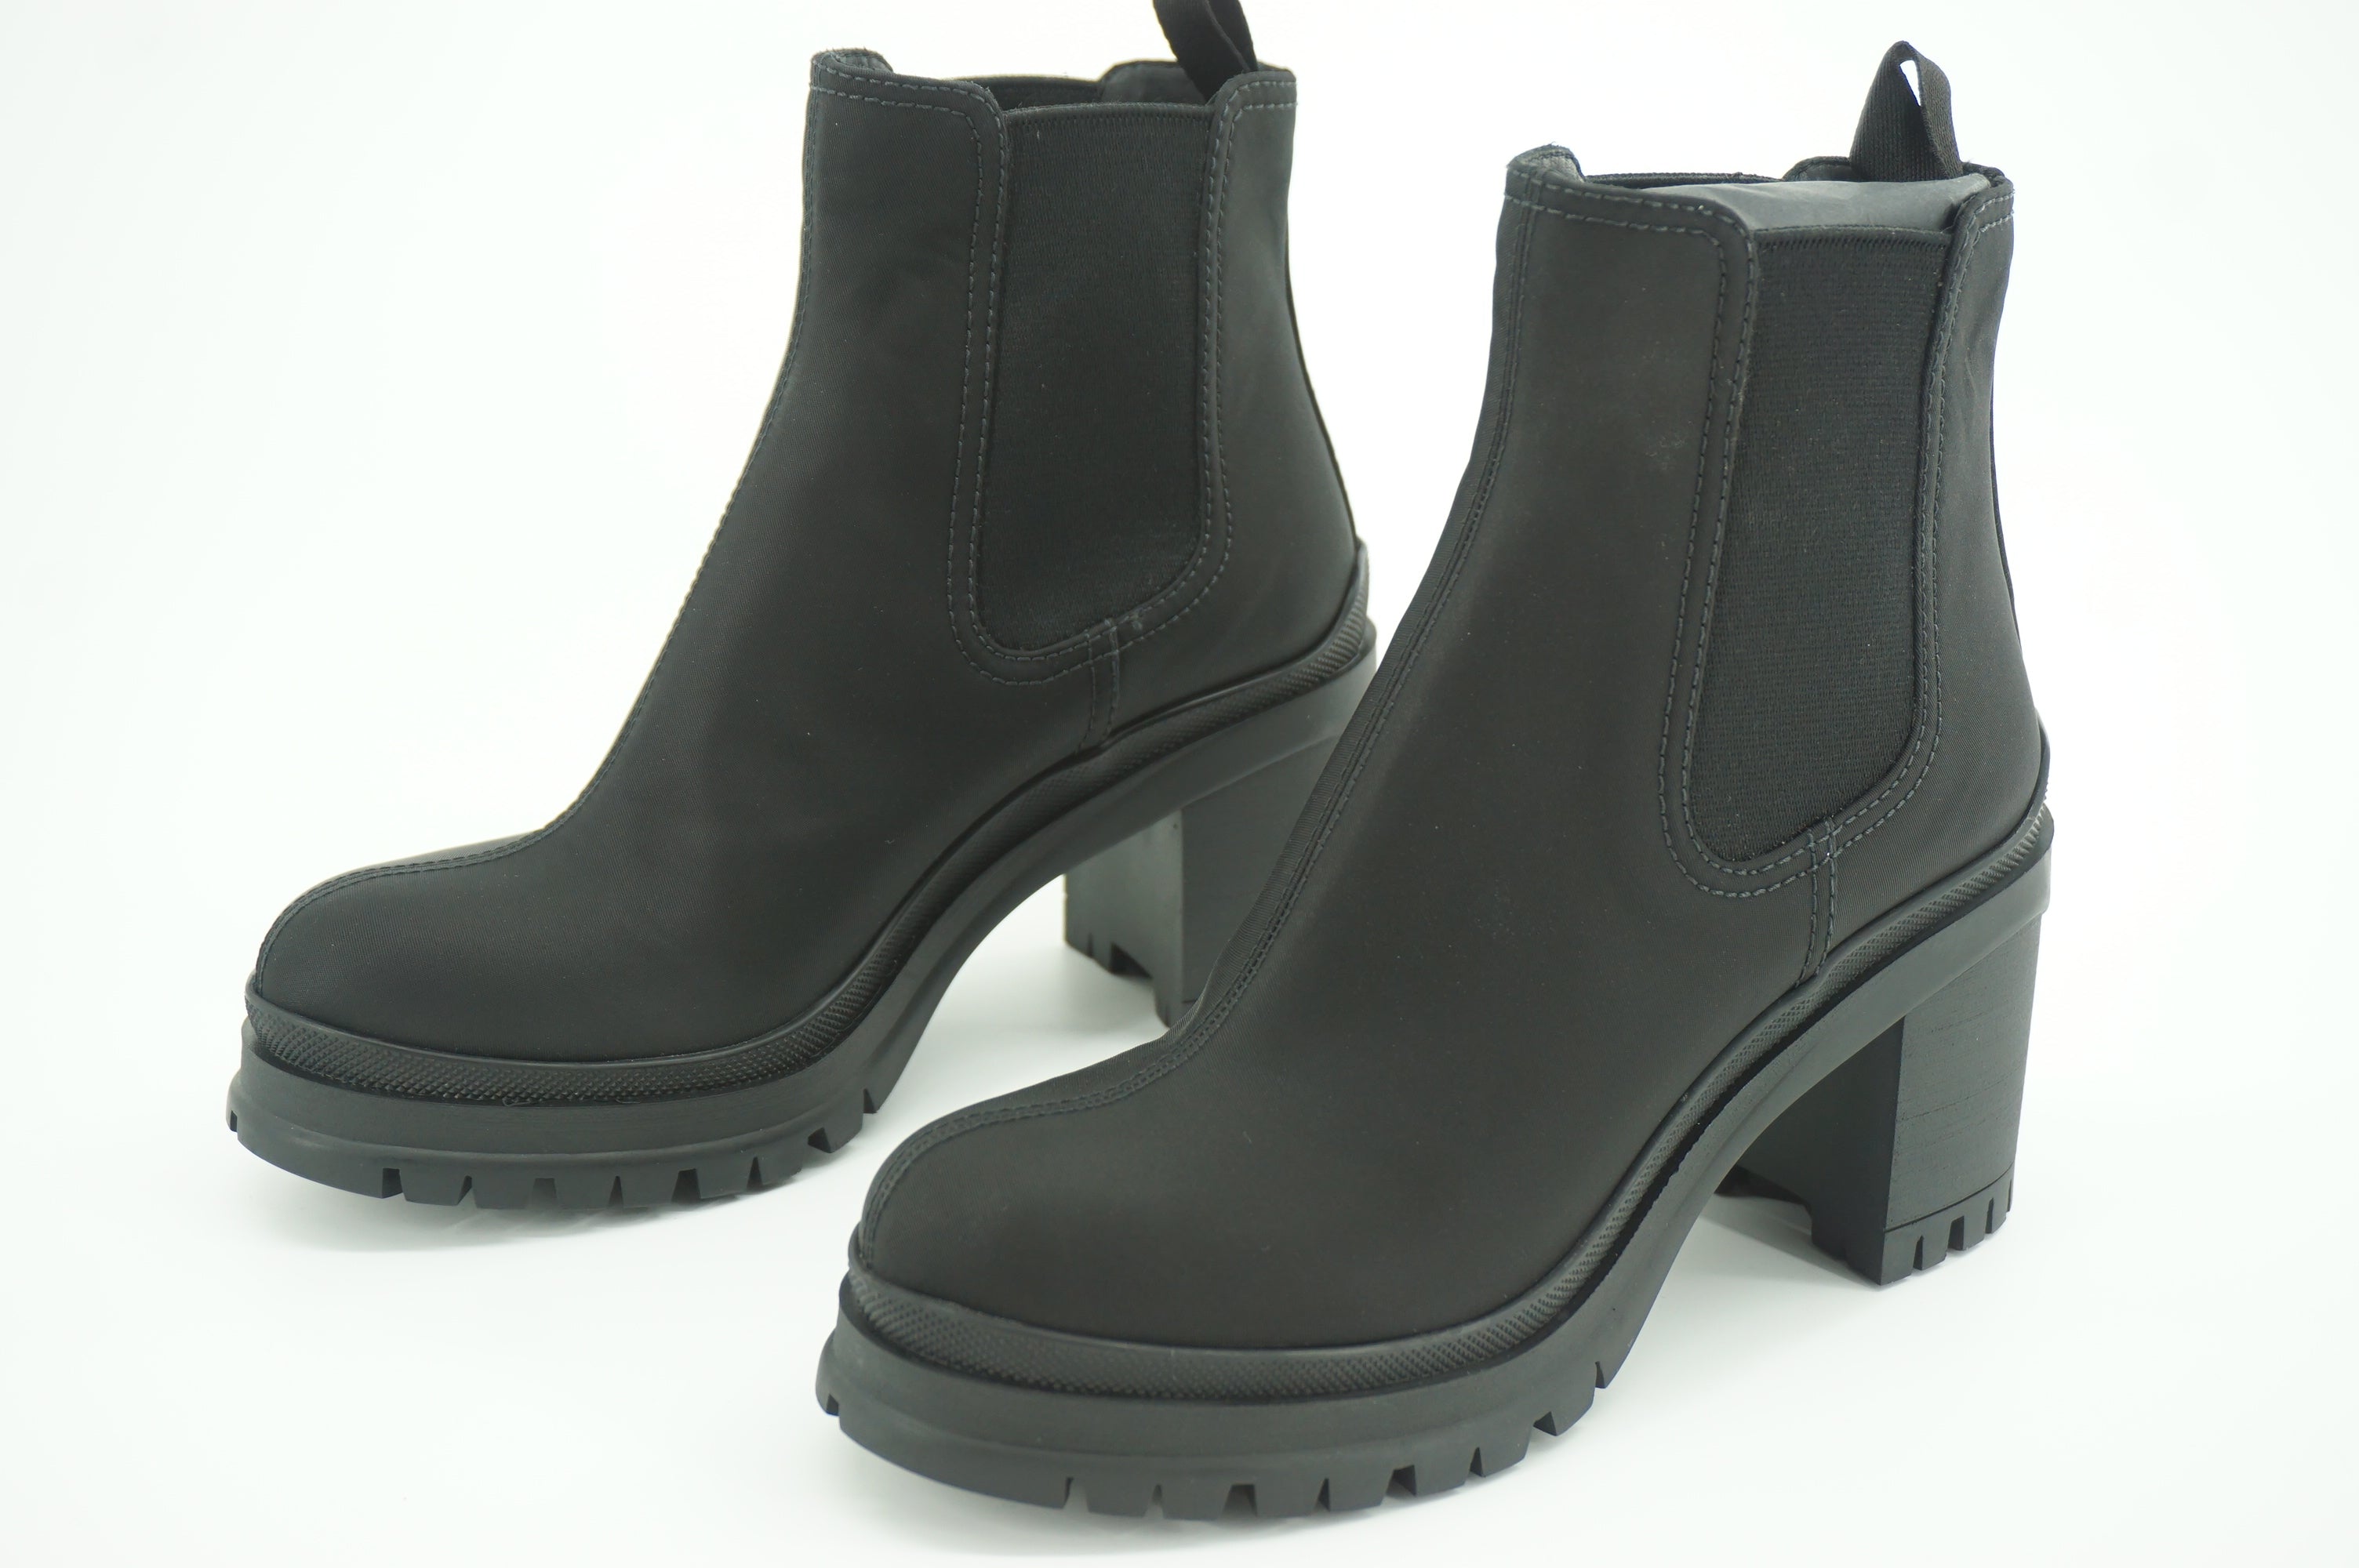 Prada Black Pull On Chelsea Combat Stretch Ankle Boots SZ 36.5 New Lugg $775